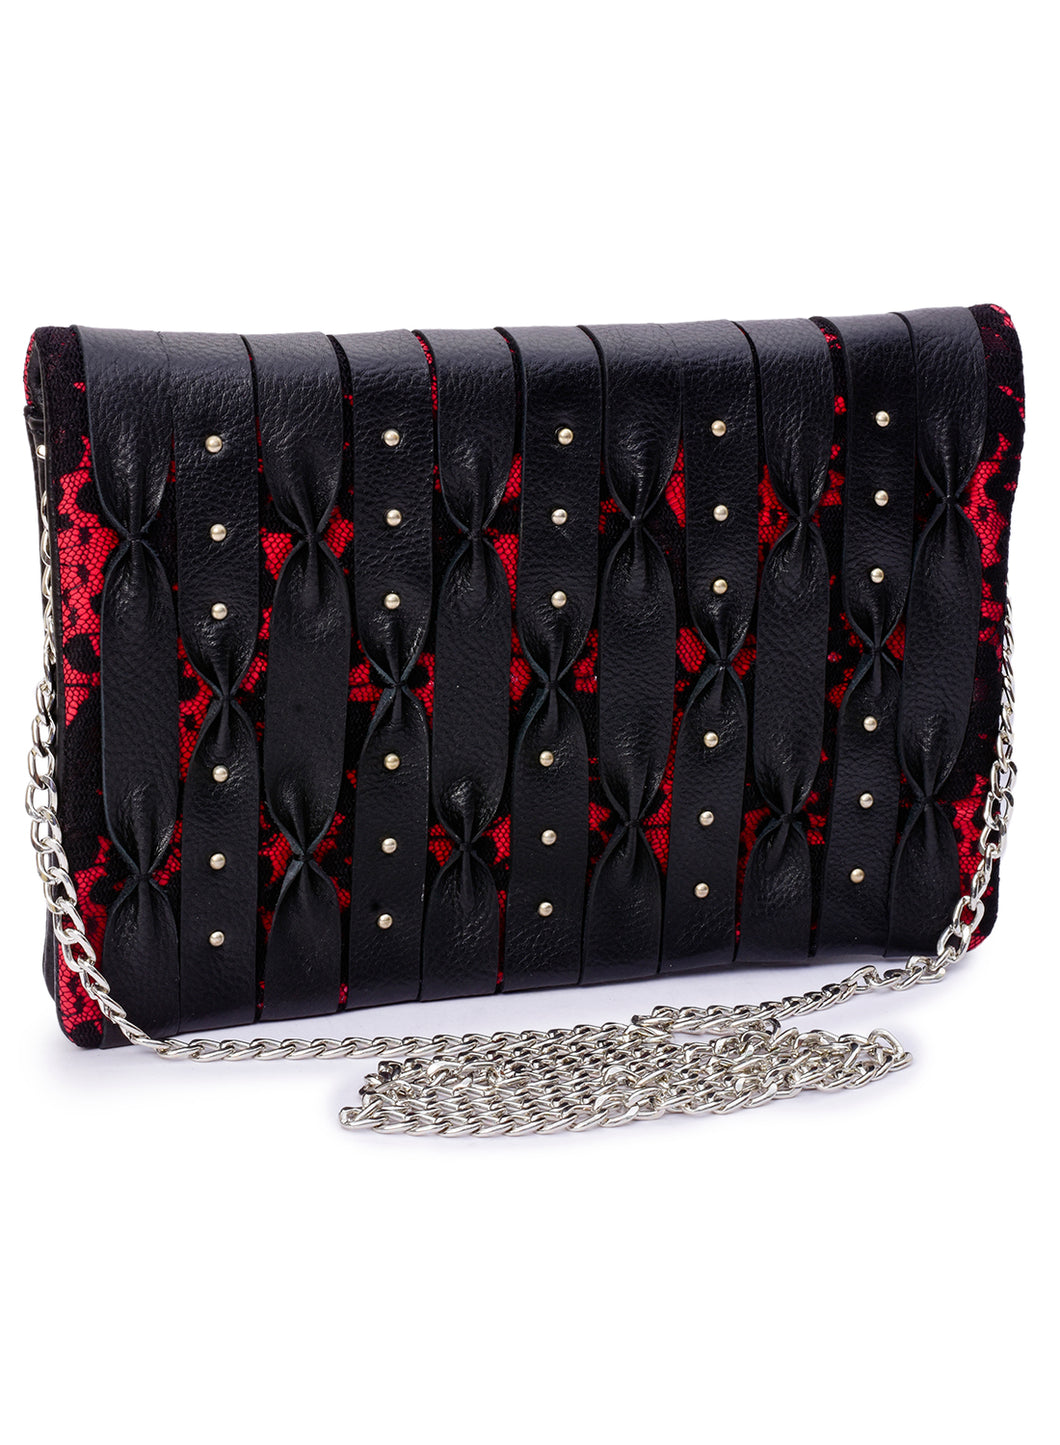 Floral Lace & Leather Combined Fold Over Clutch